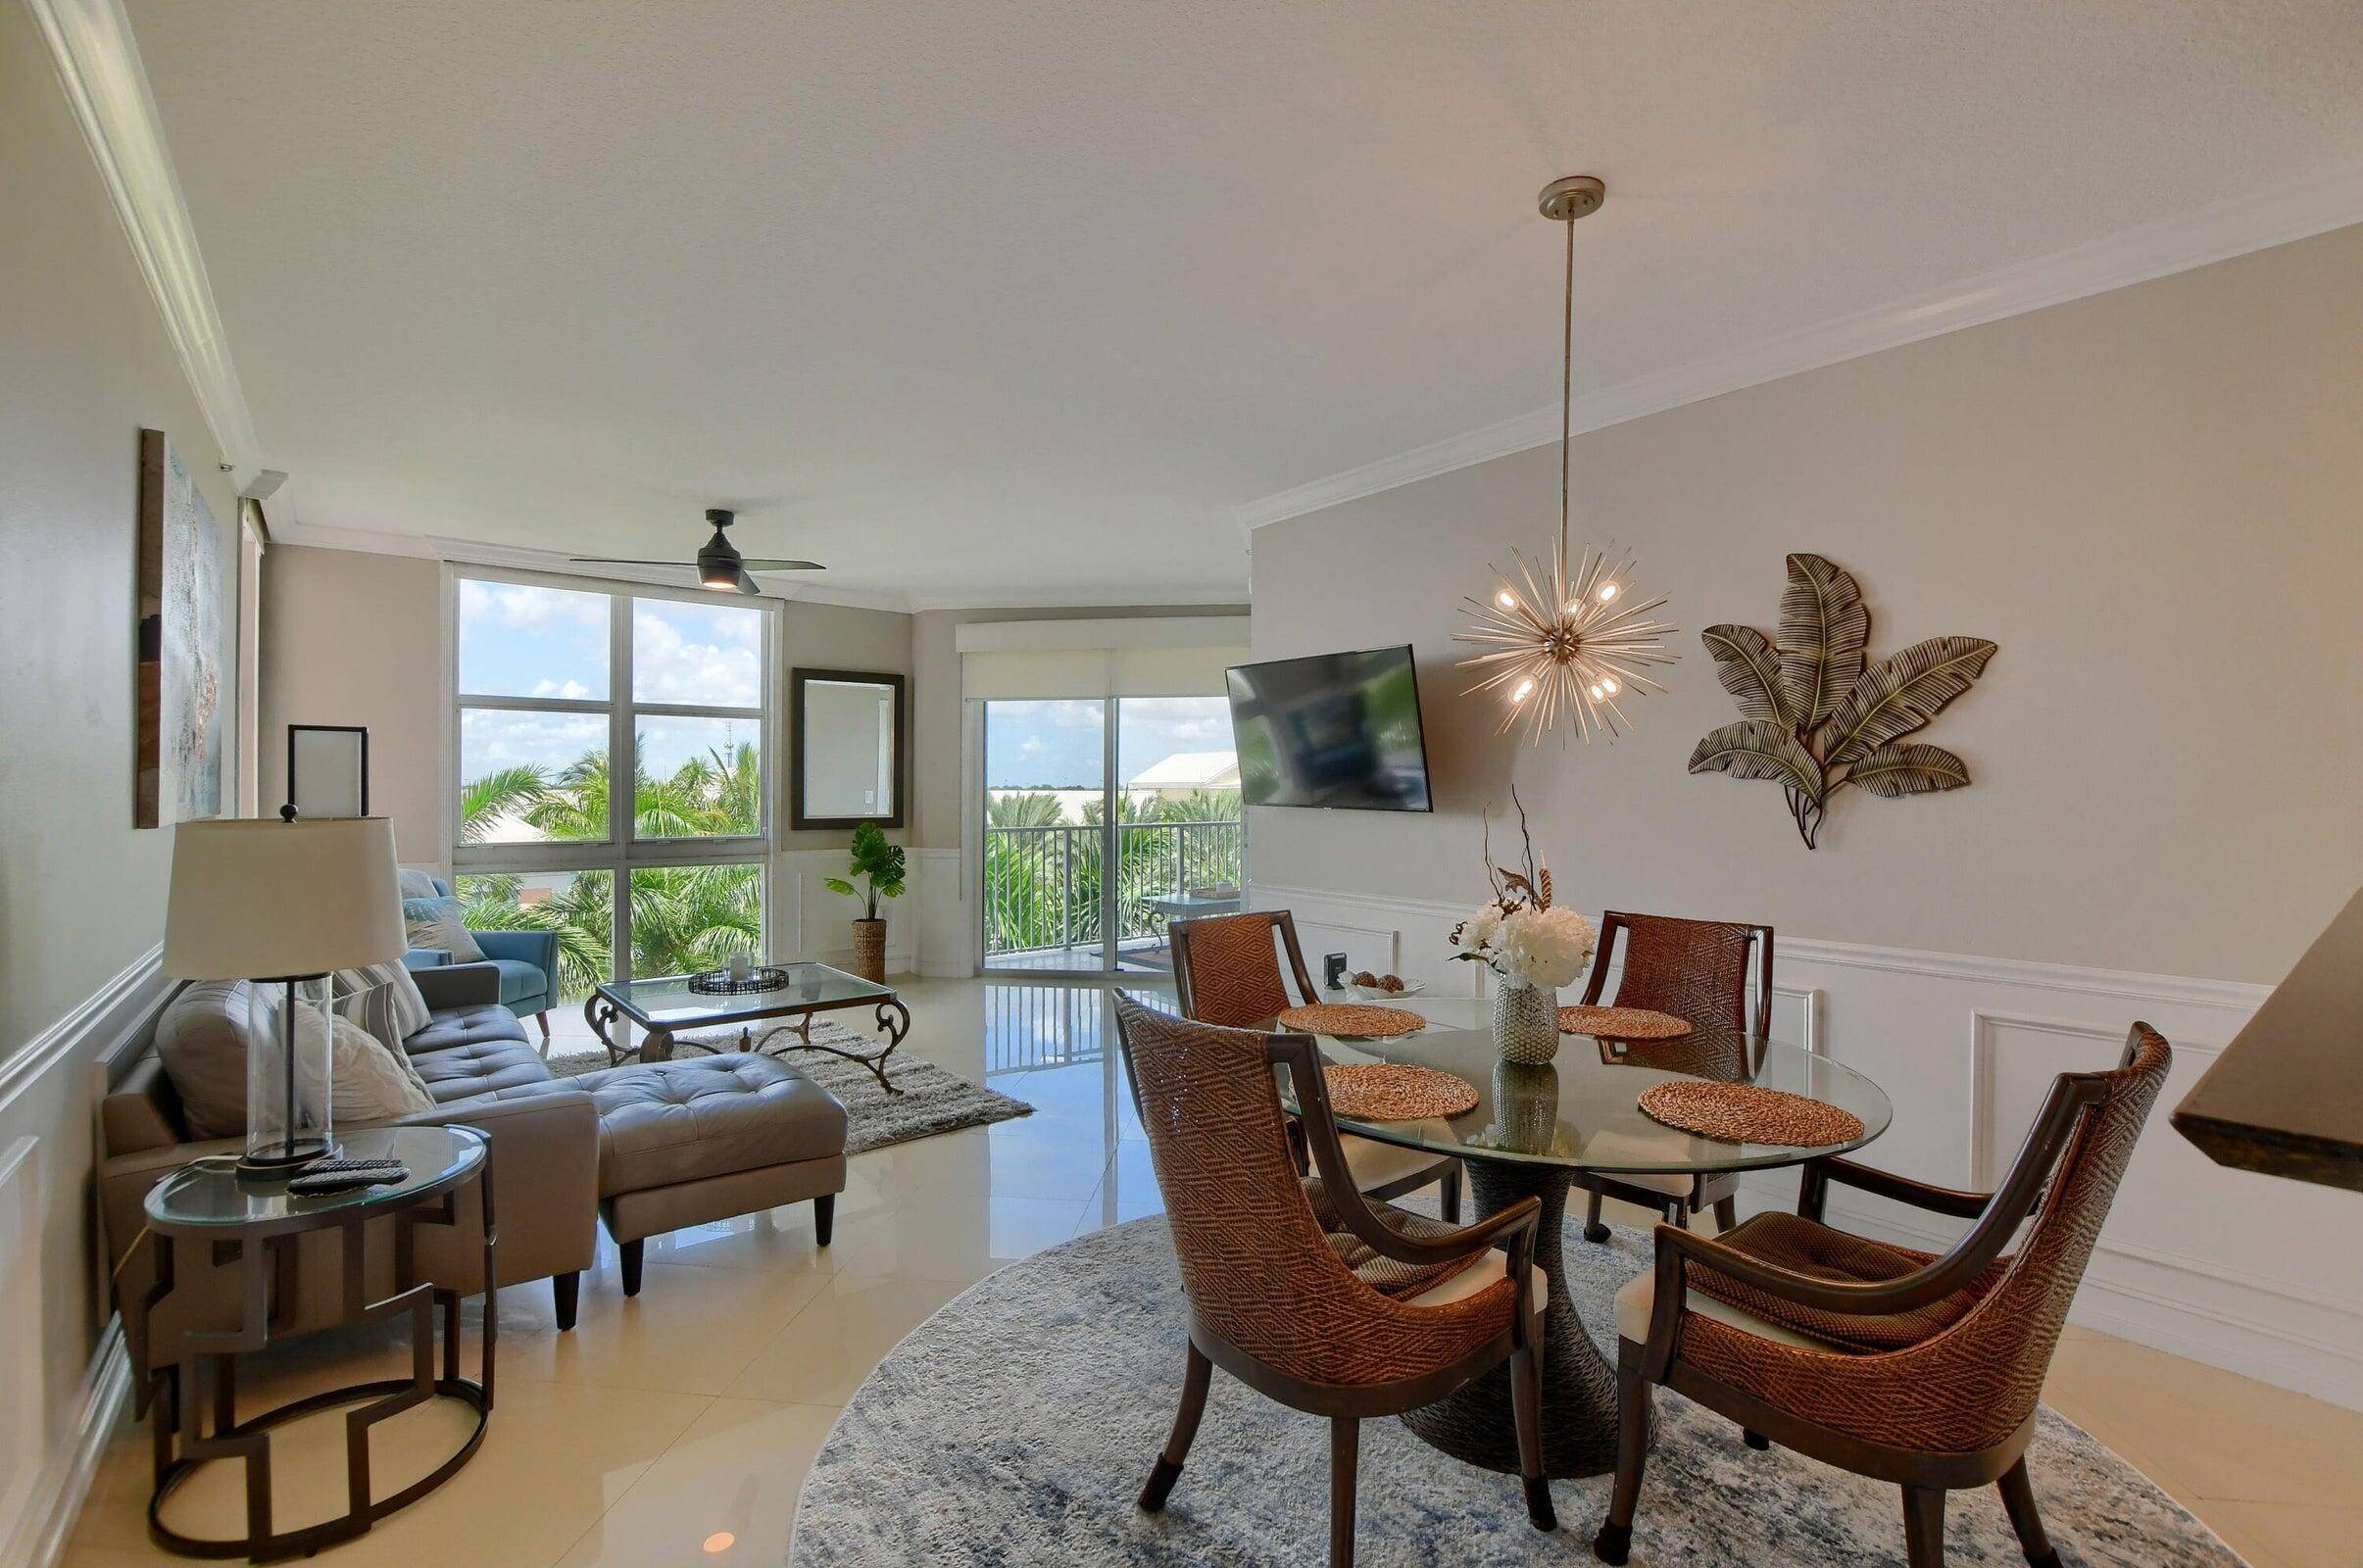 Enjoy Resort Style Living in this beautifully updated Fully Furnished and Turnkey condominium located in the sought after waterfront community, Moorings in Lantana.